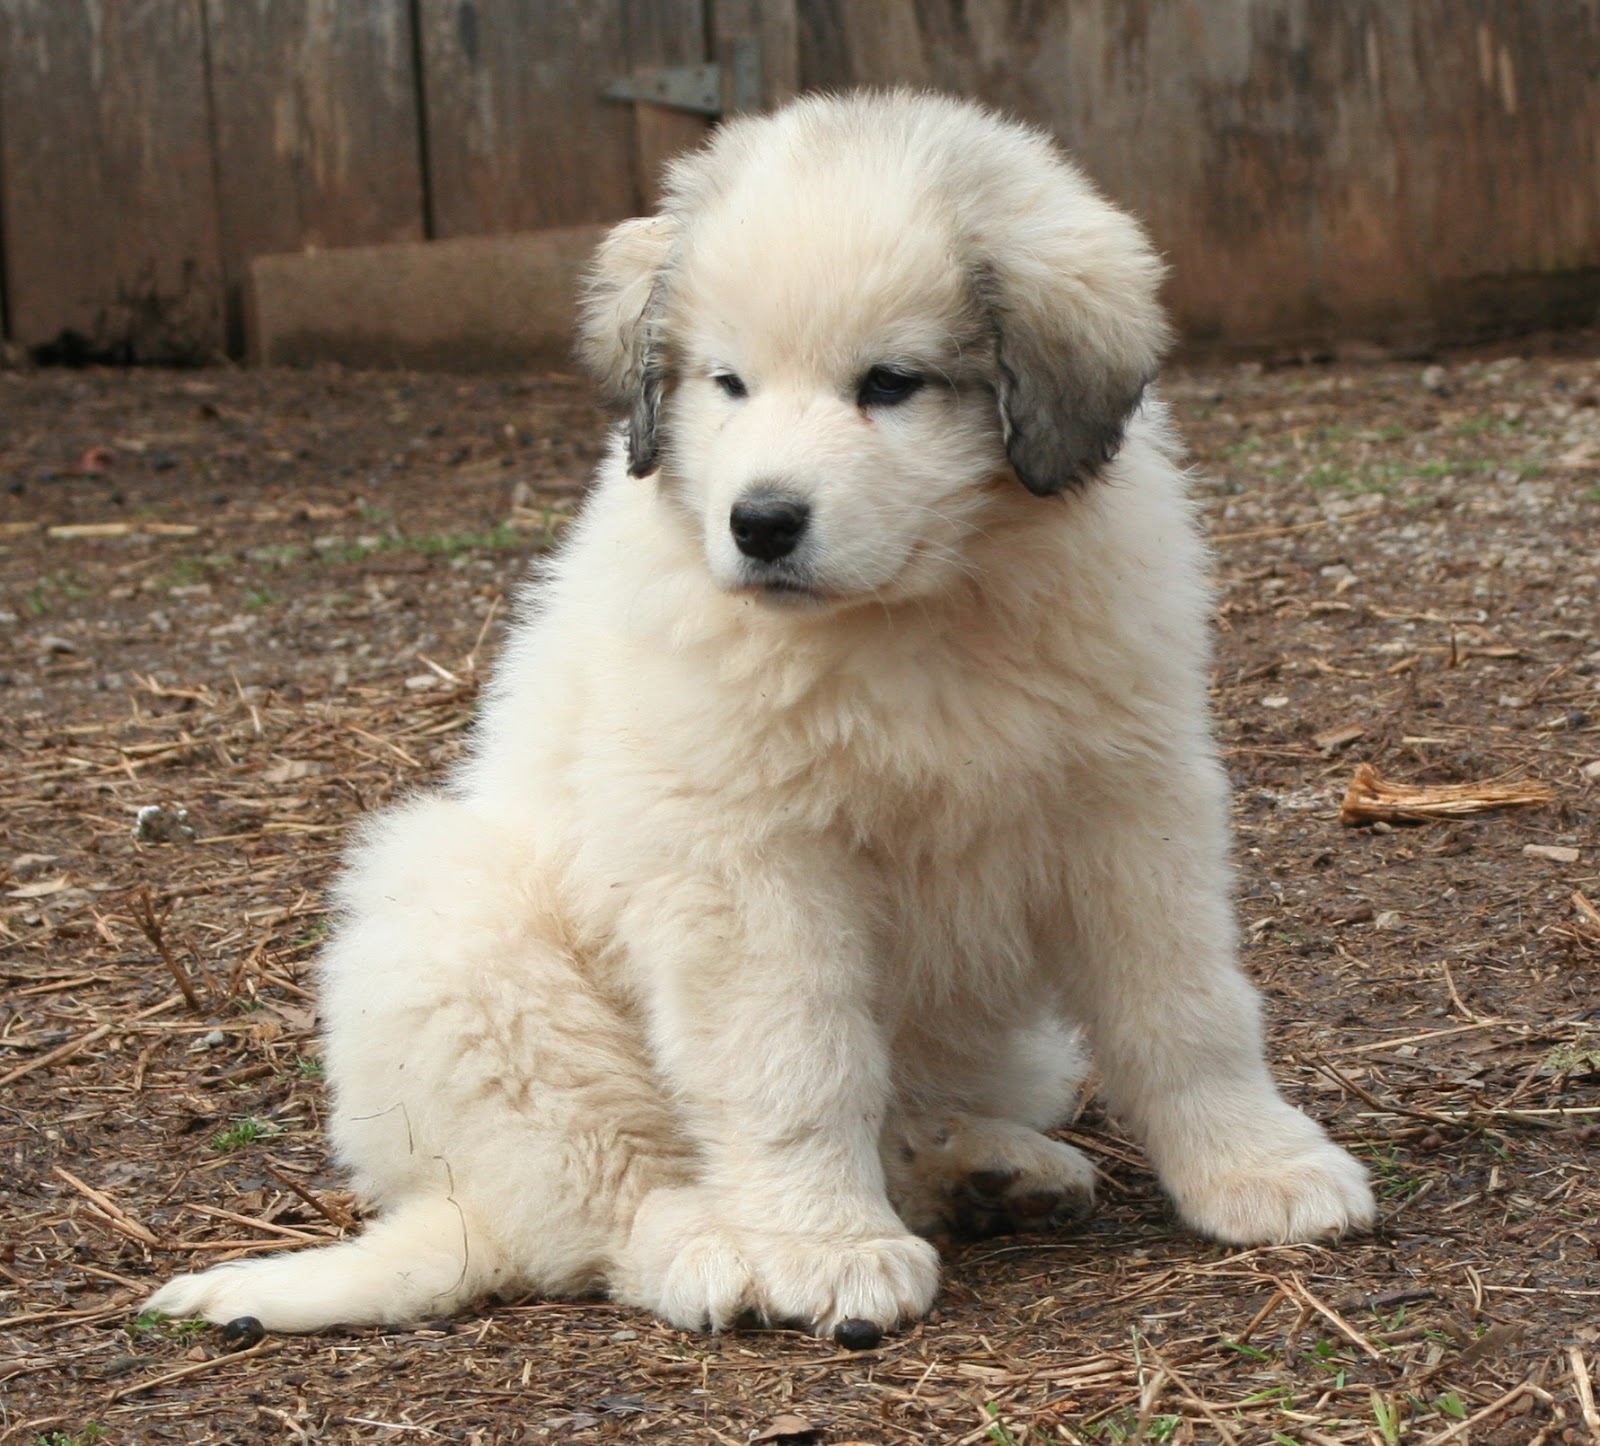 Hilltop Great Pyrenees: Our Puppies!